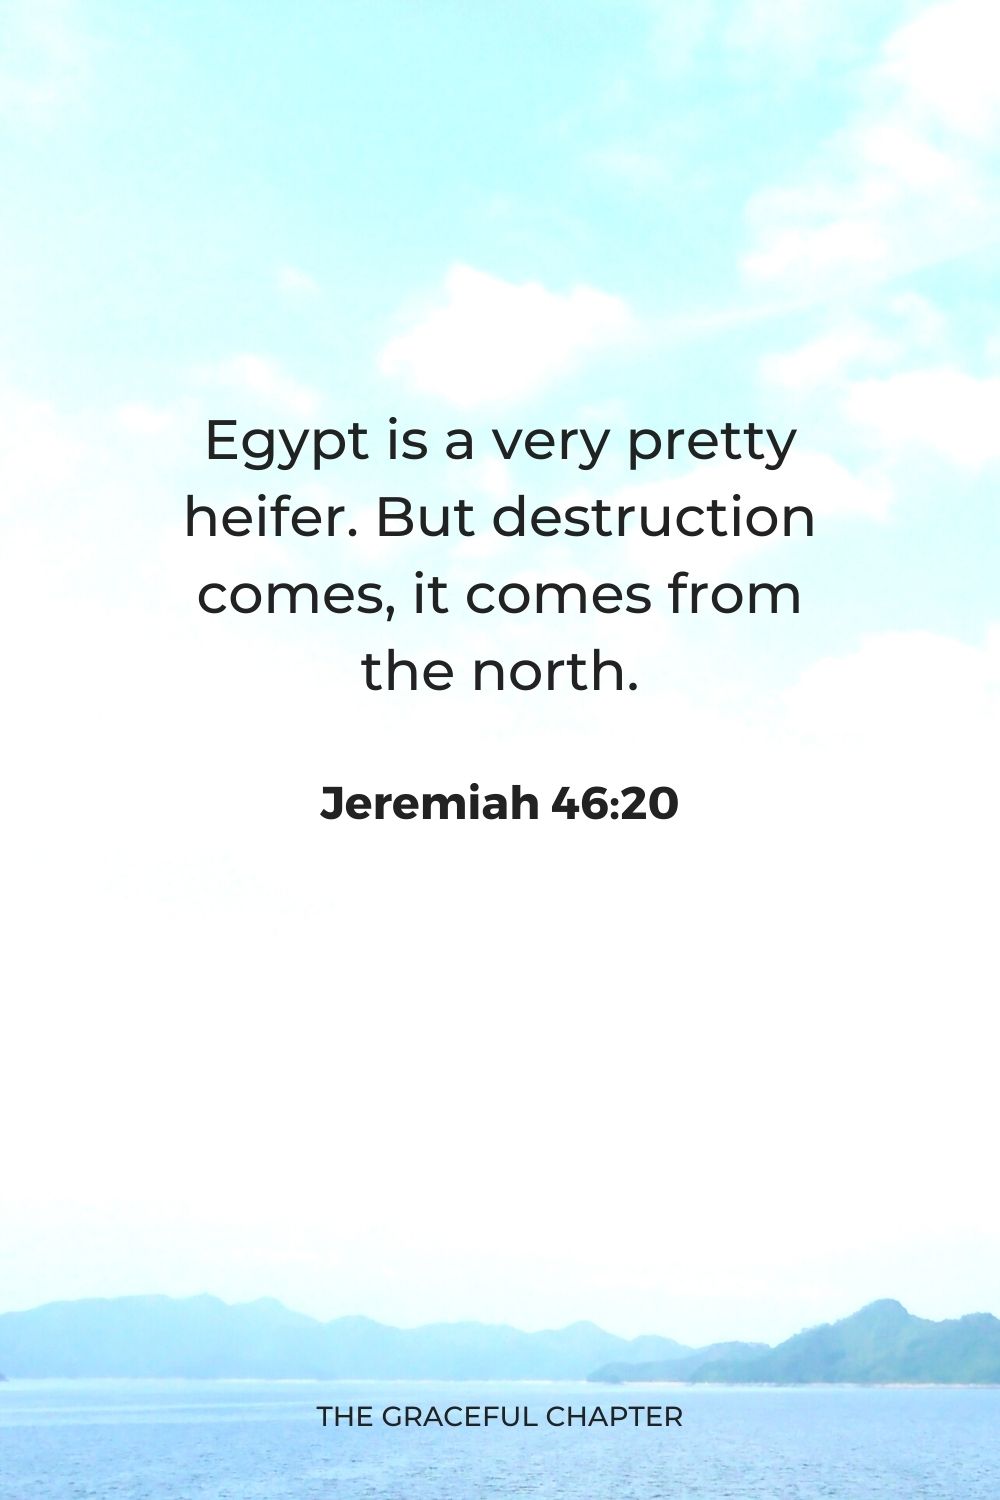 Egypt is a very pretty heifer, But destruction comes, it comes from the north.